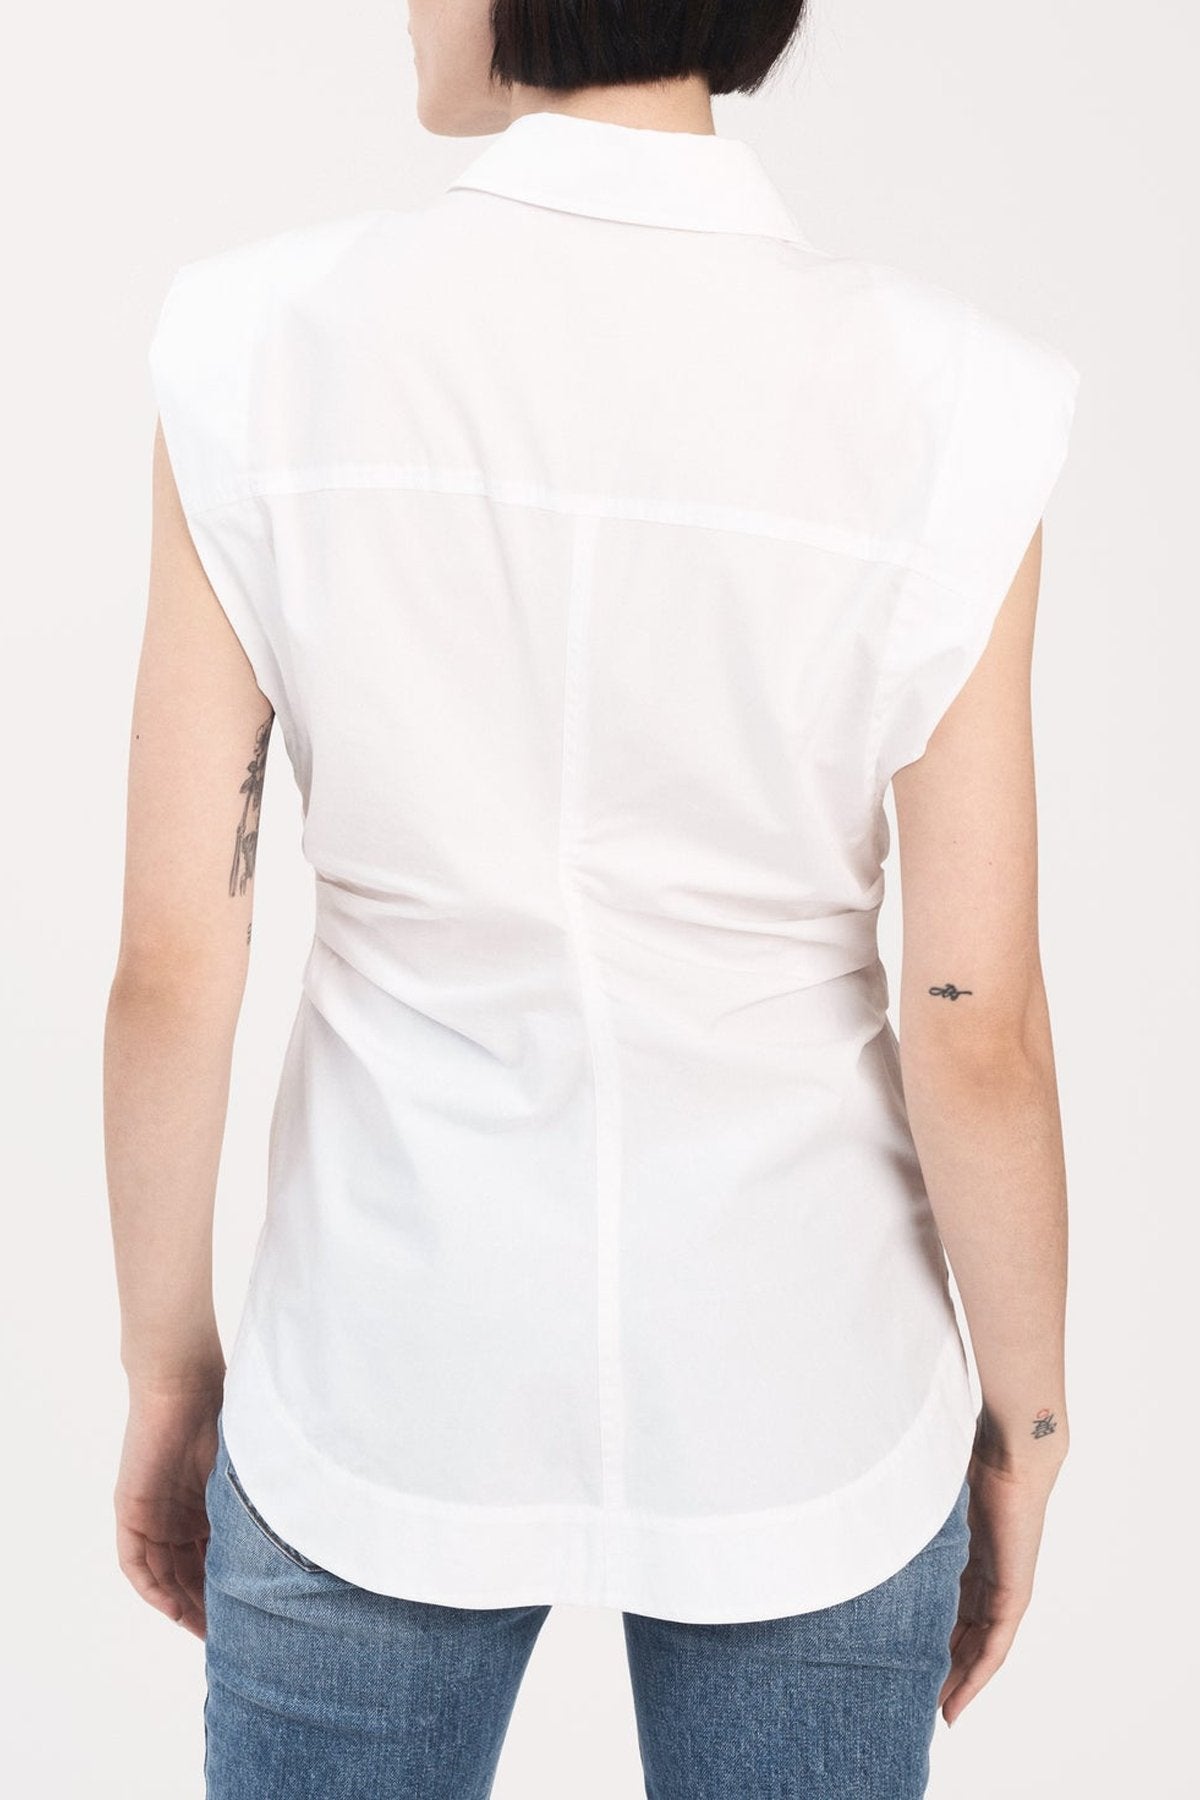 Ivy Sleeveless Ruched Button Down Shirt in White - shop-olivia.com